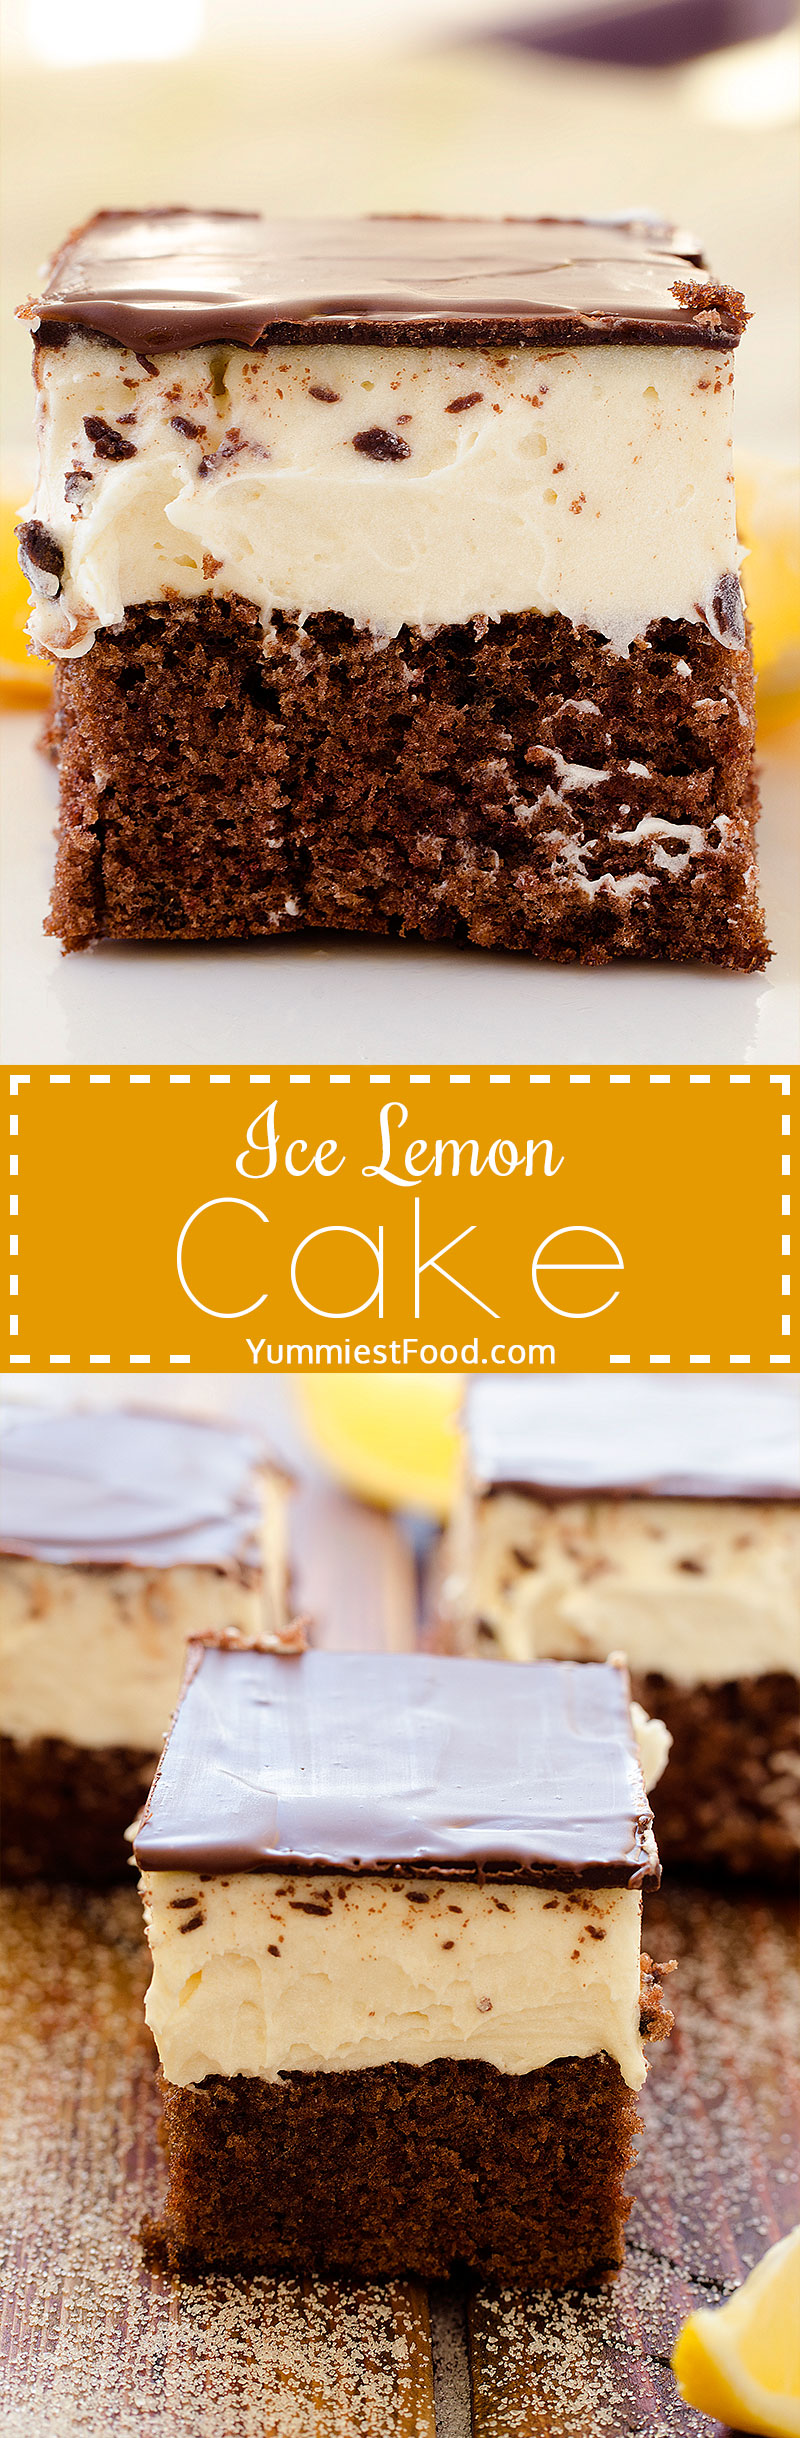 Ice Lemon Cake - Try to make Ice lemon cake, very quick, easy, creamy, so soft and perfect for every occasion